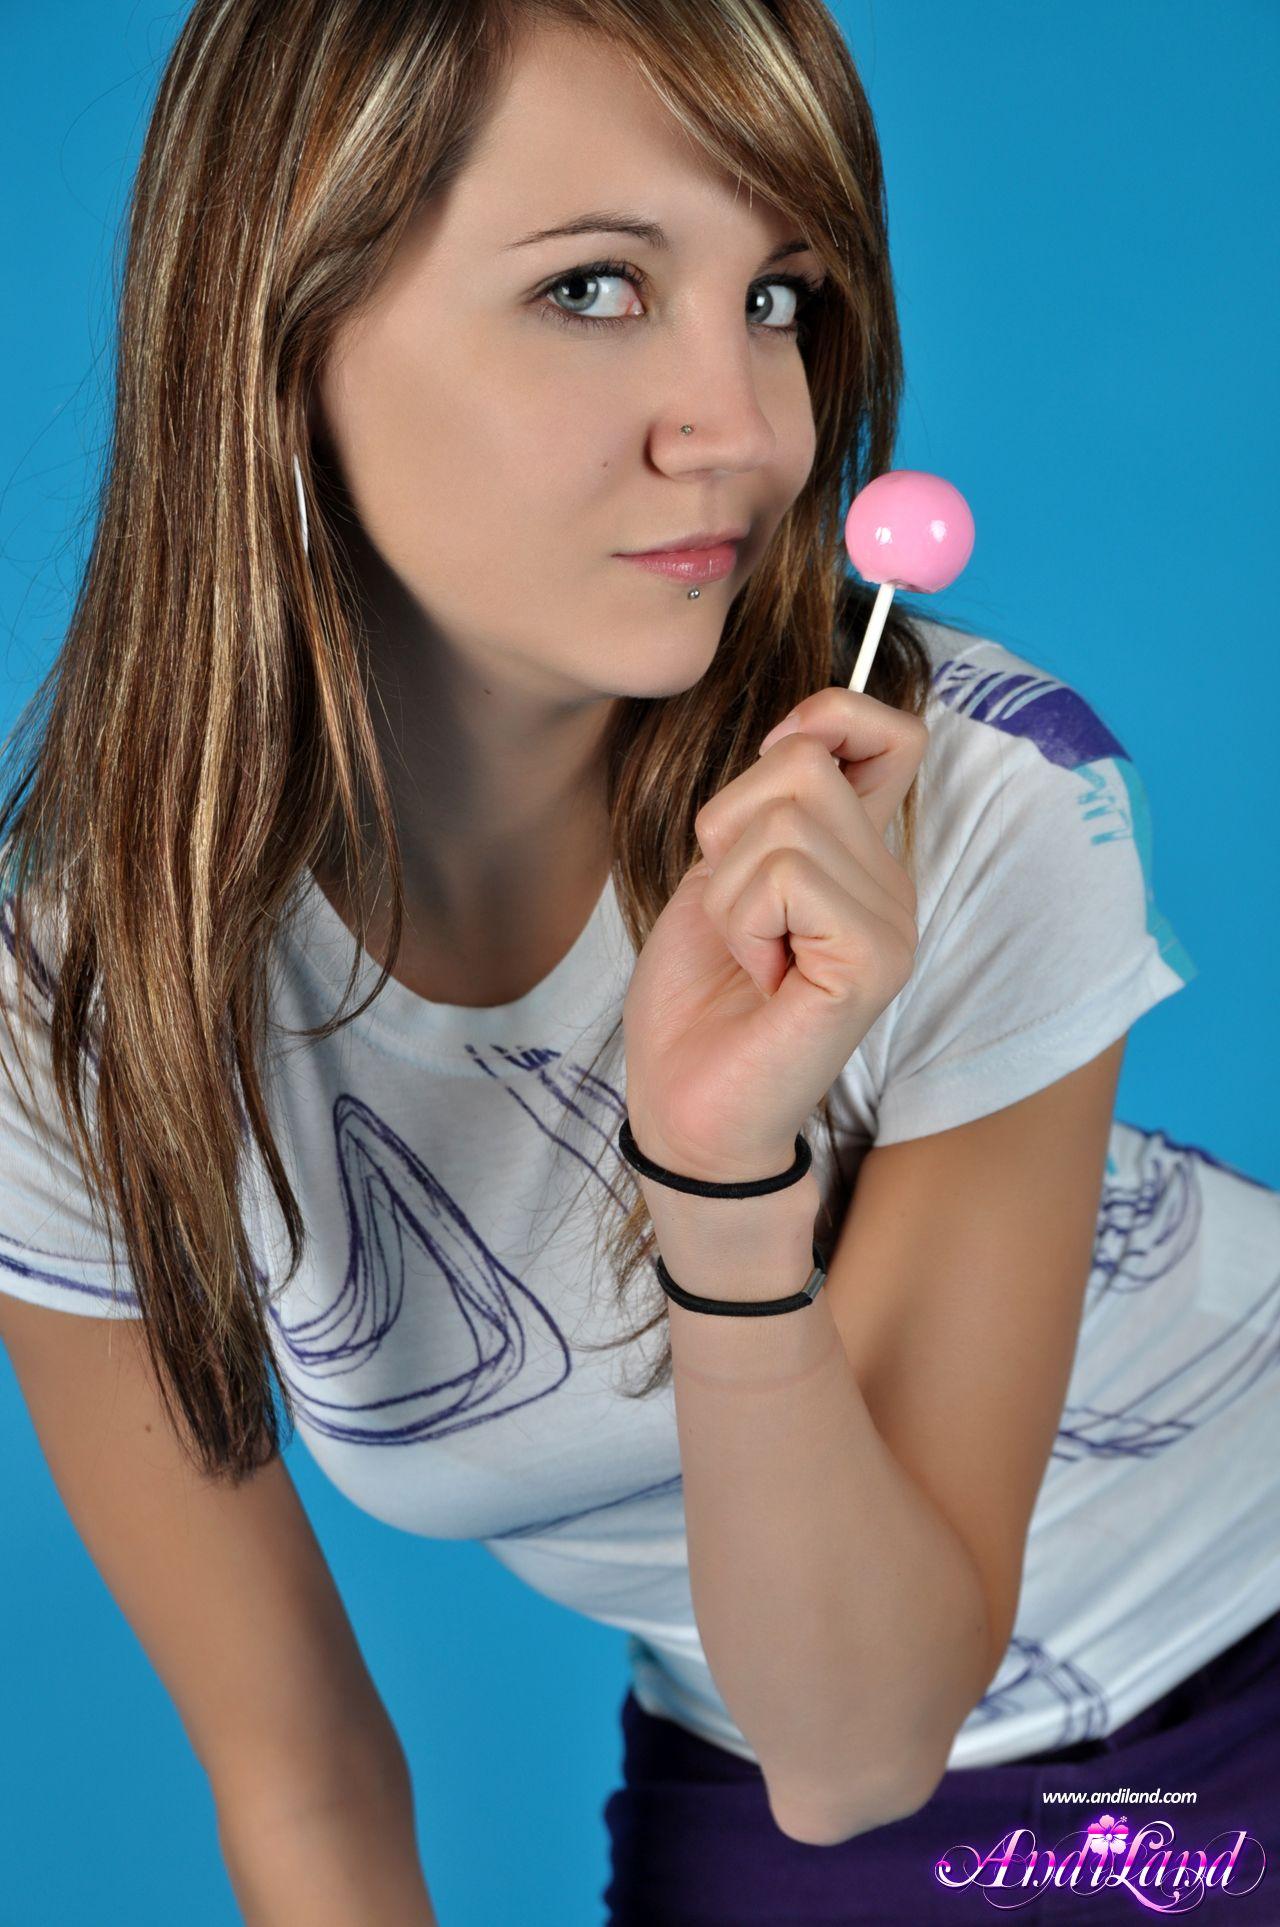 Pictures of Andi Land sucking on a lollipop #53143227